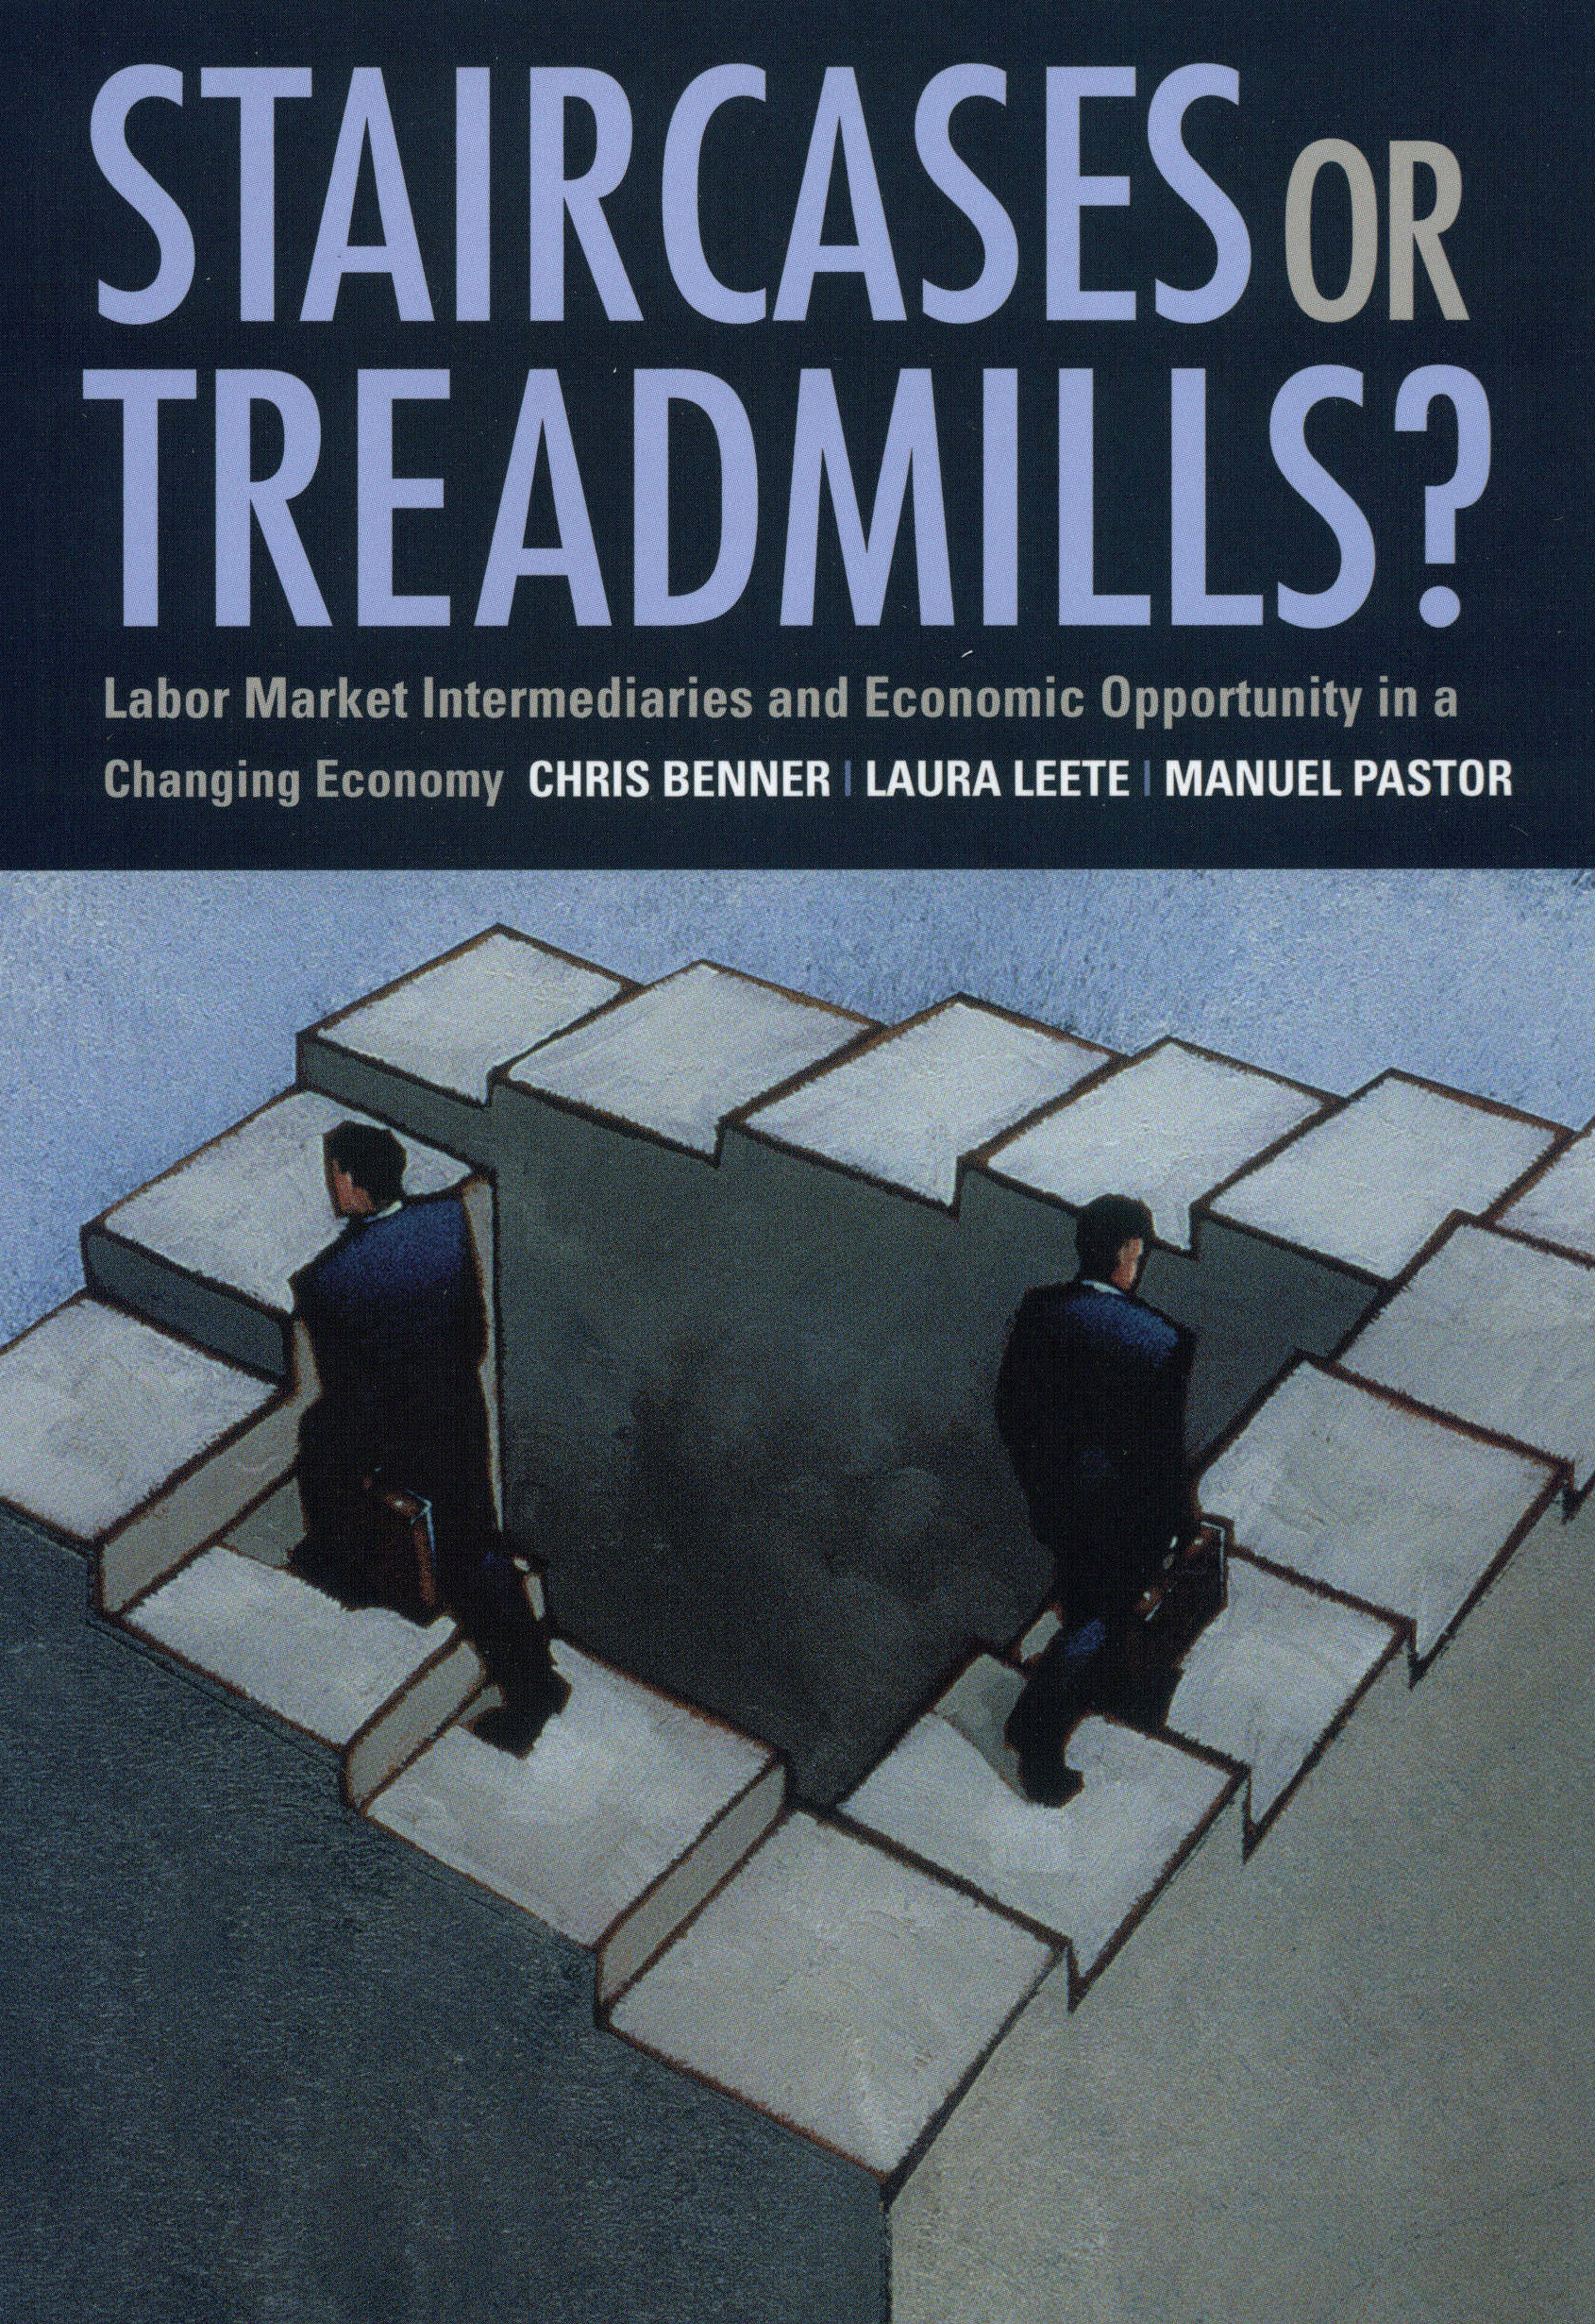 Staircases or Treadmills?